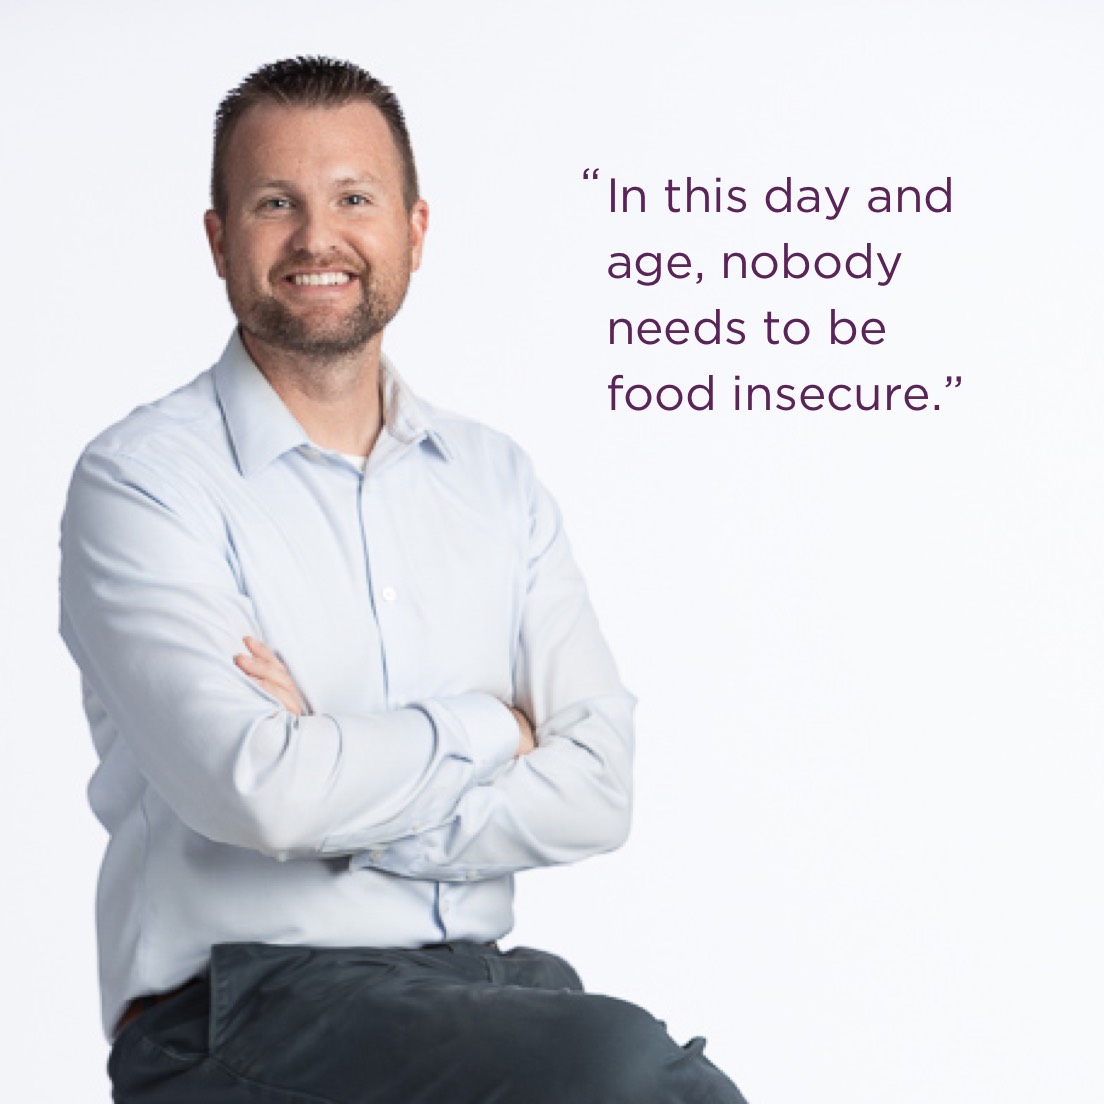 Chris Hagemo - "In this day and age, nobody needs to be food insecure."